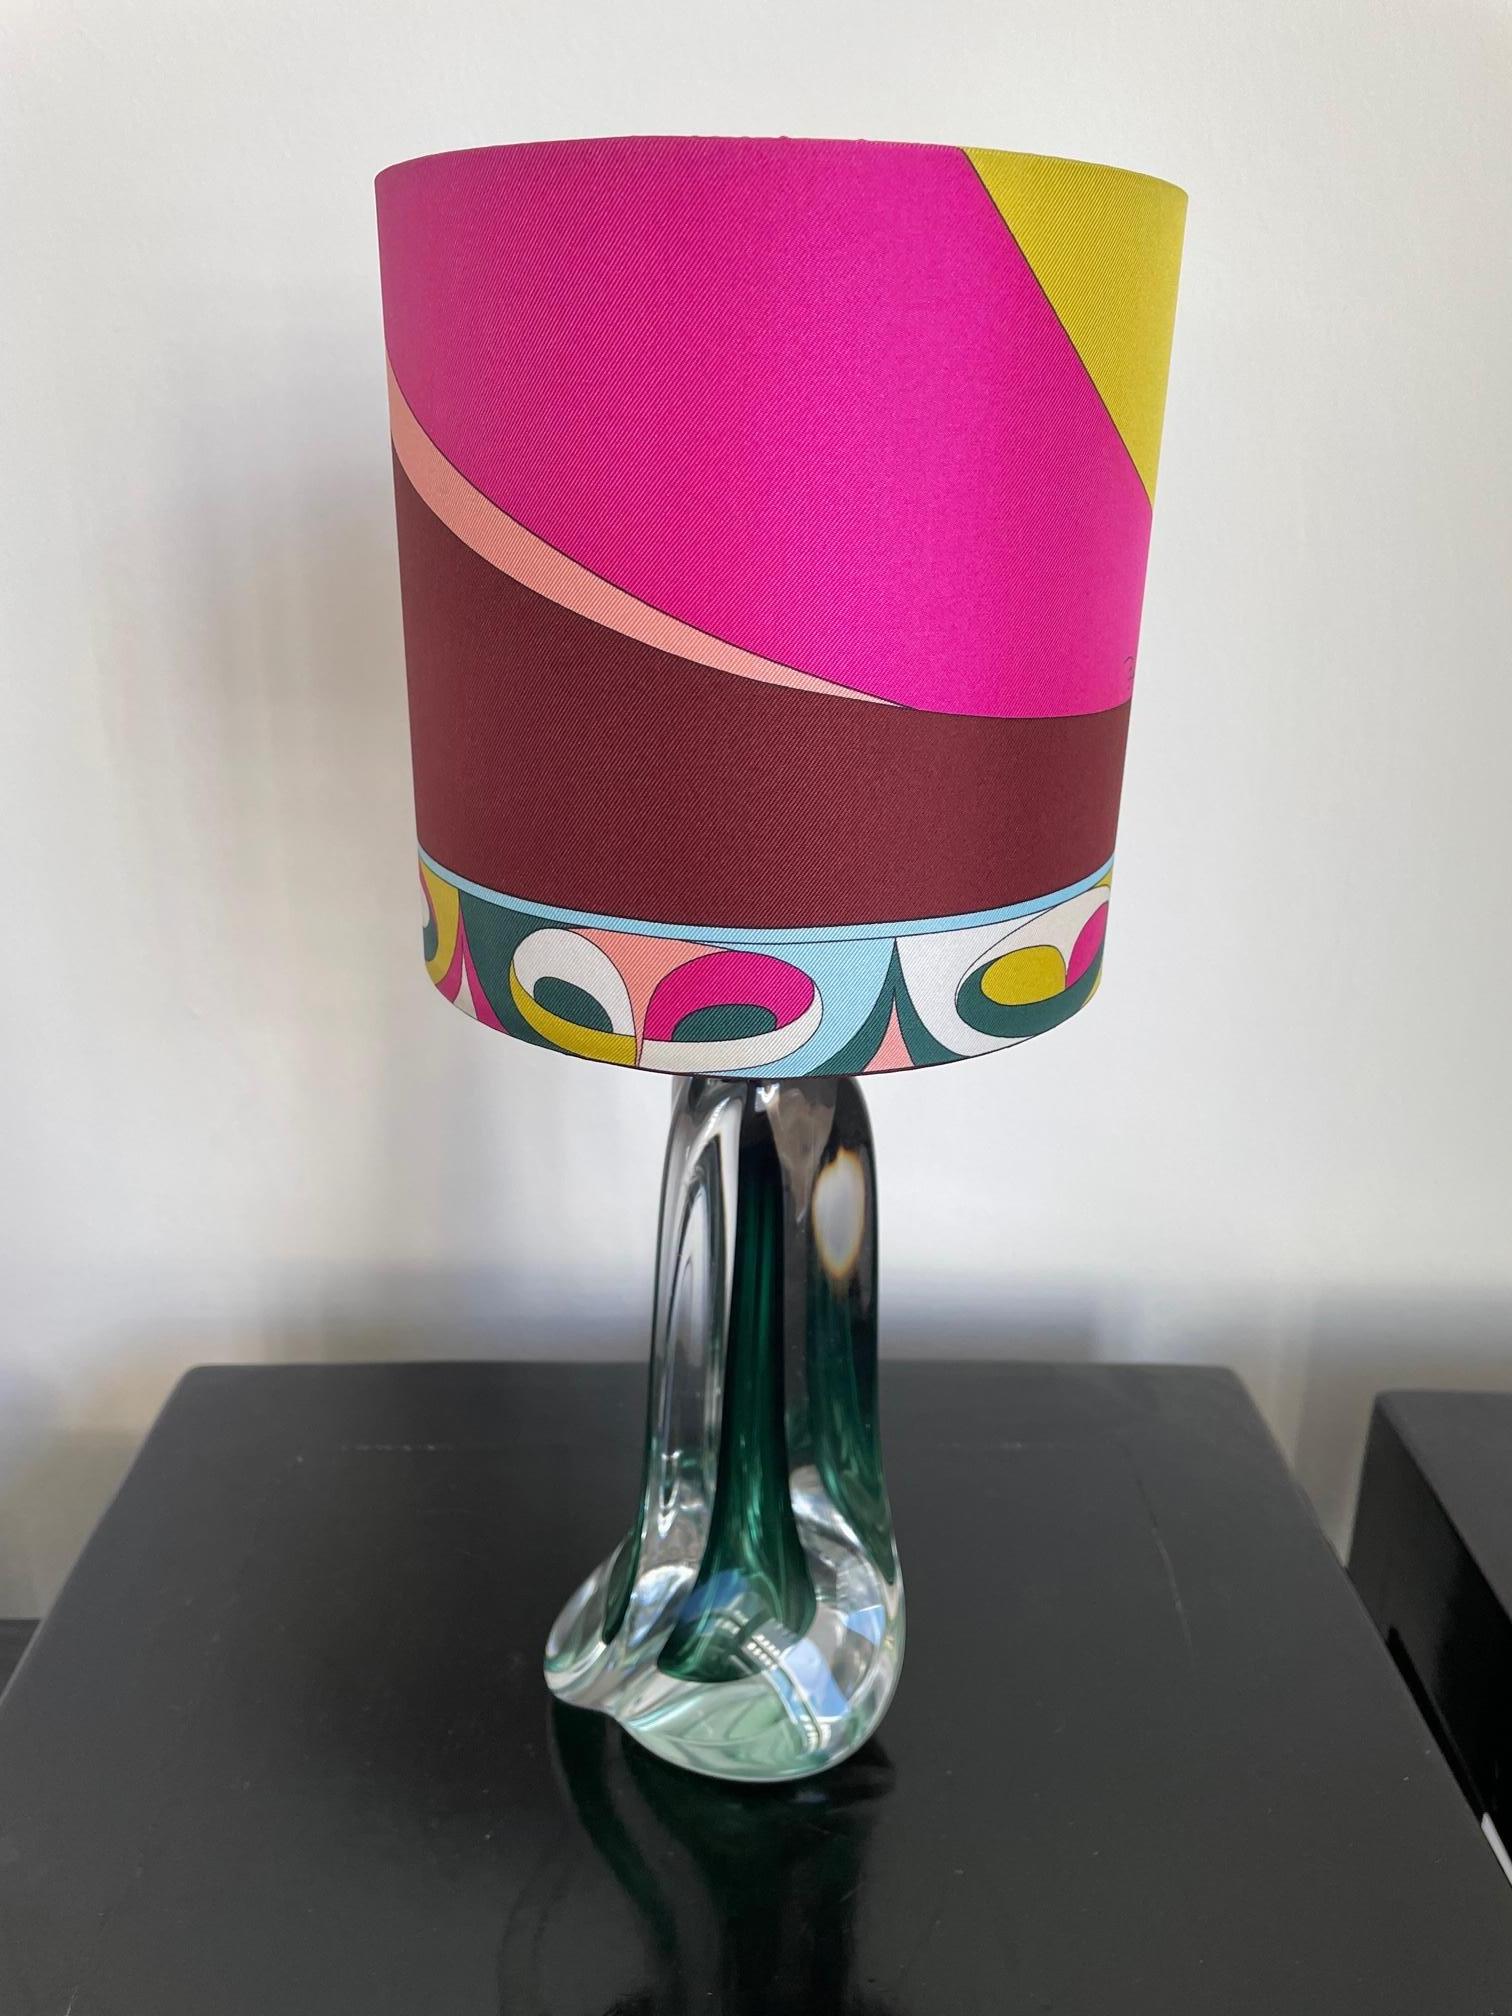 Unique Table Light: Val Saint Lambert crystal lamp base,
Size crystal base 19 cm Hx 10cm W
Total height table lamp: base with lamp shade 35 cm,
Lamp shade in printed twill silk, colors: wine red, ginger, pink, white and blue signed Pucci , made